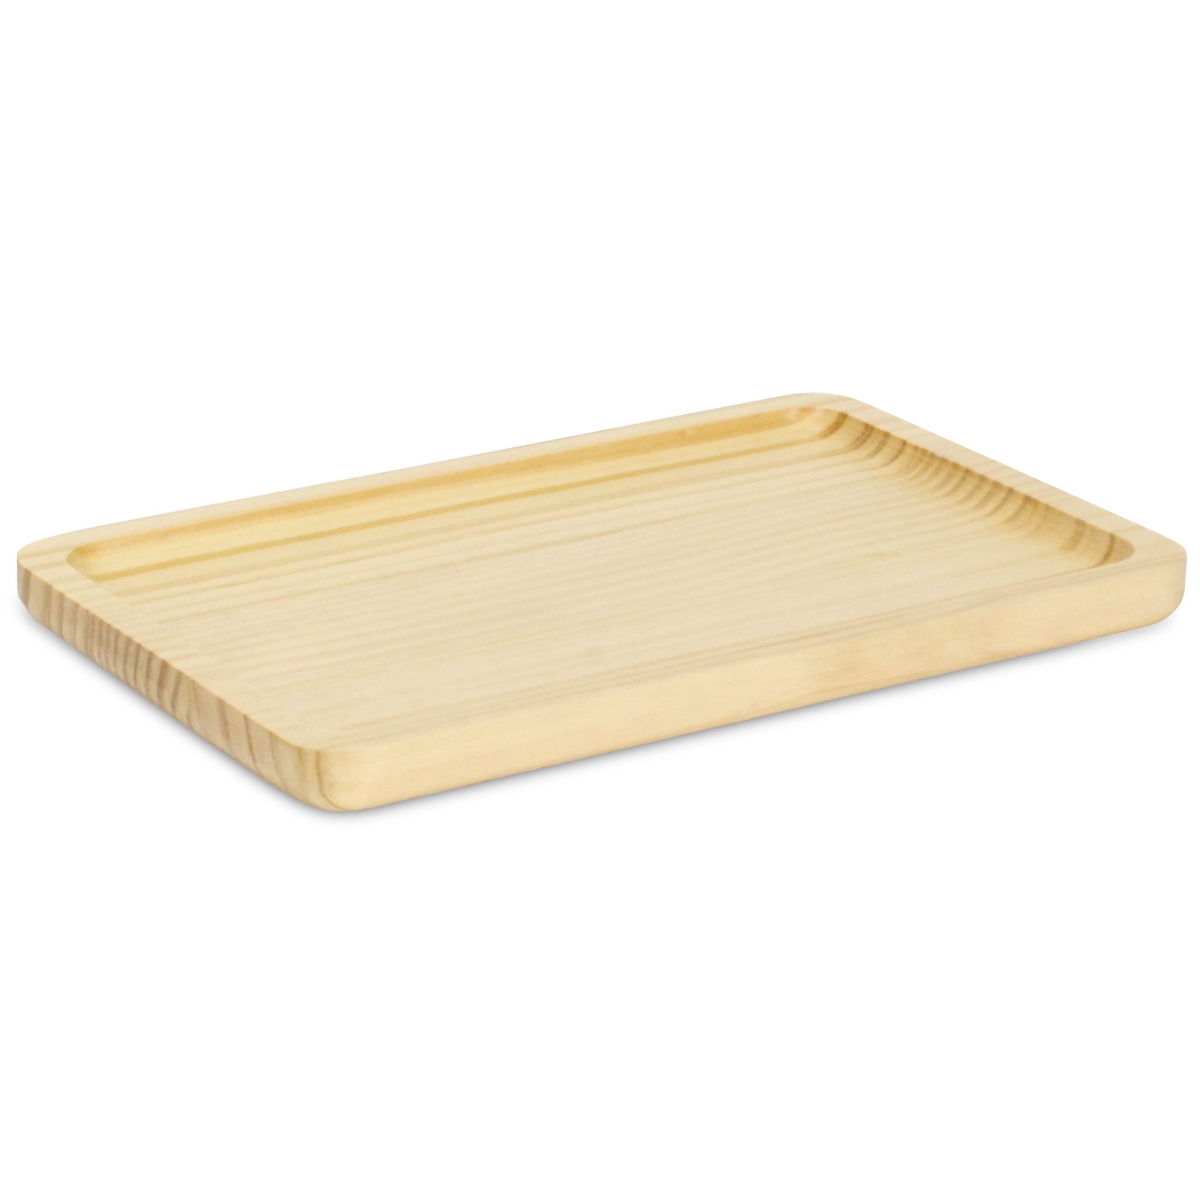 Picture of Cheungs 5958RT Kishen Ridge Rectangular Natural Wood Glossy Tray with Smooth Corners